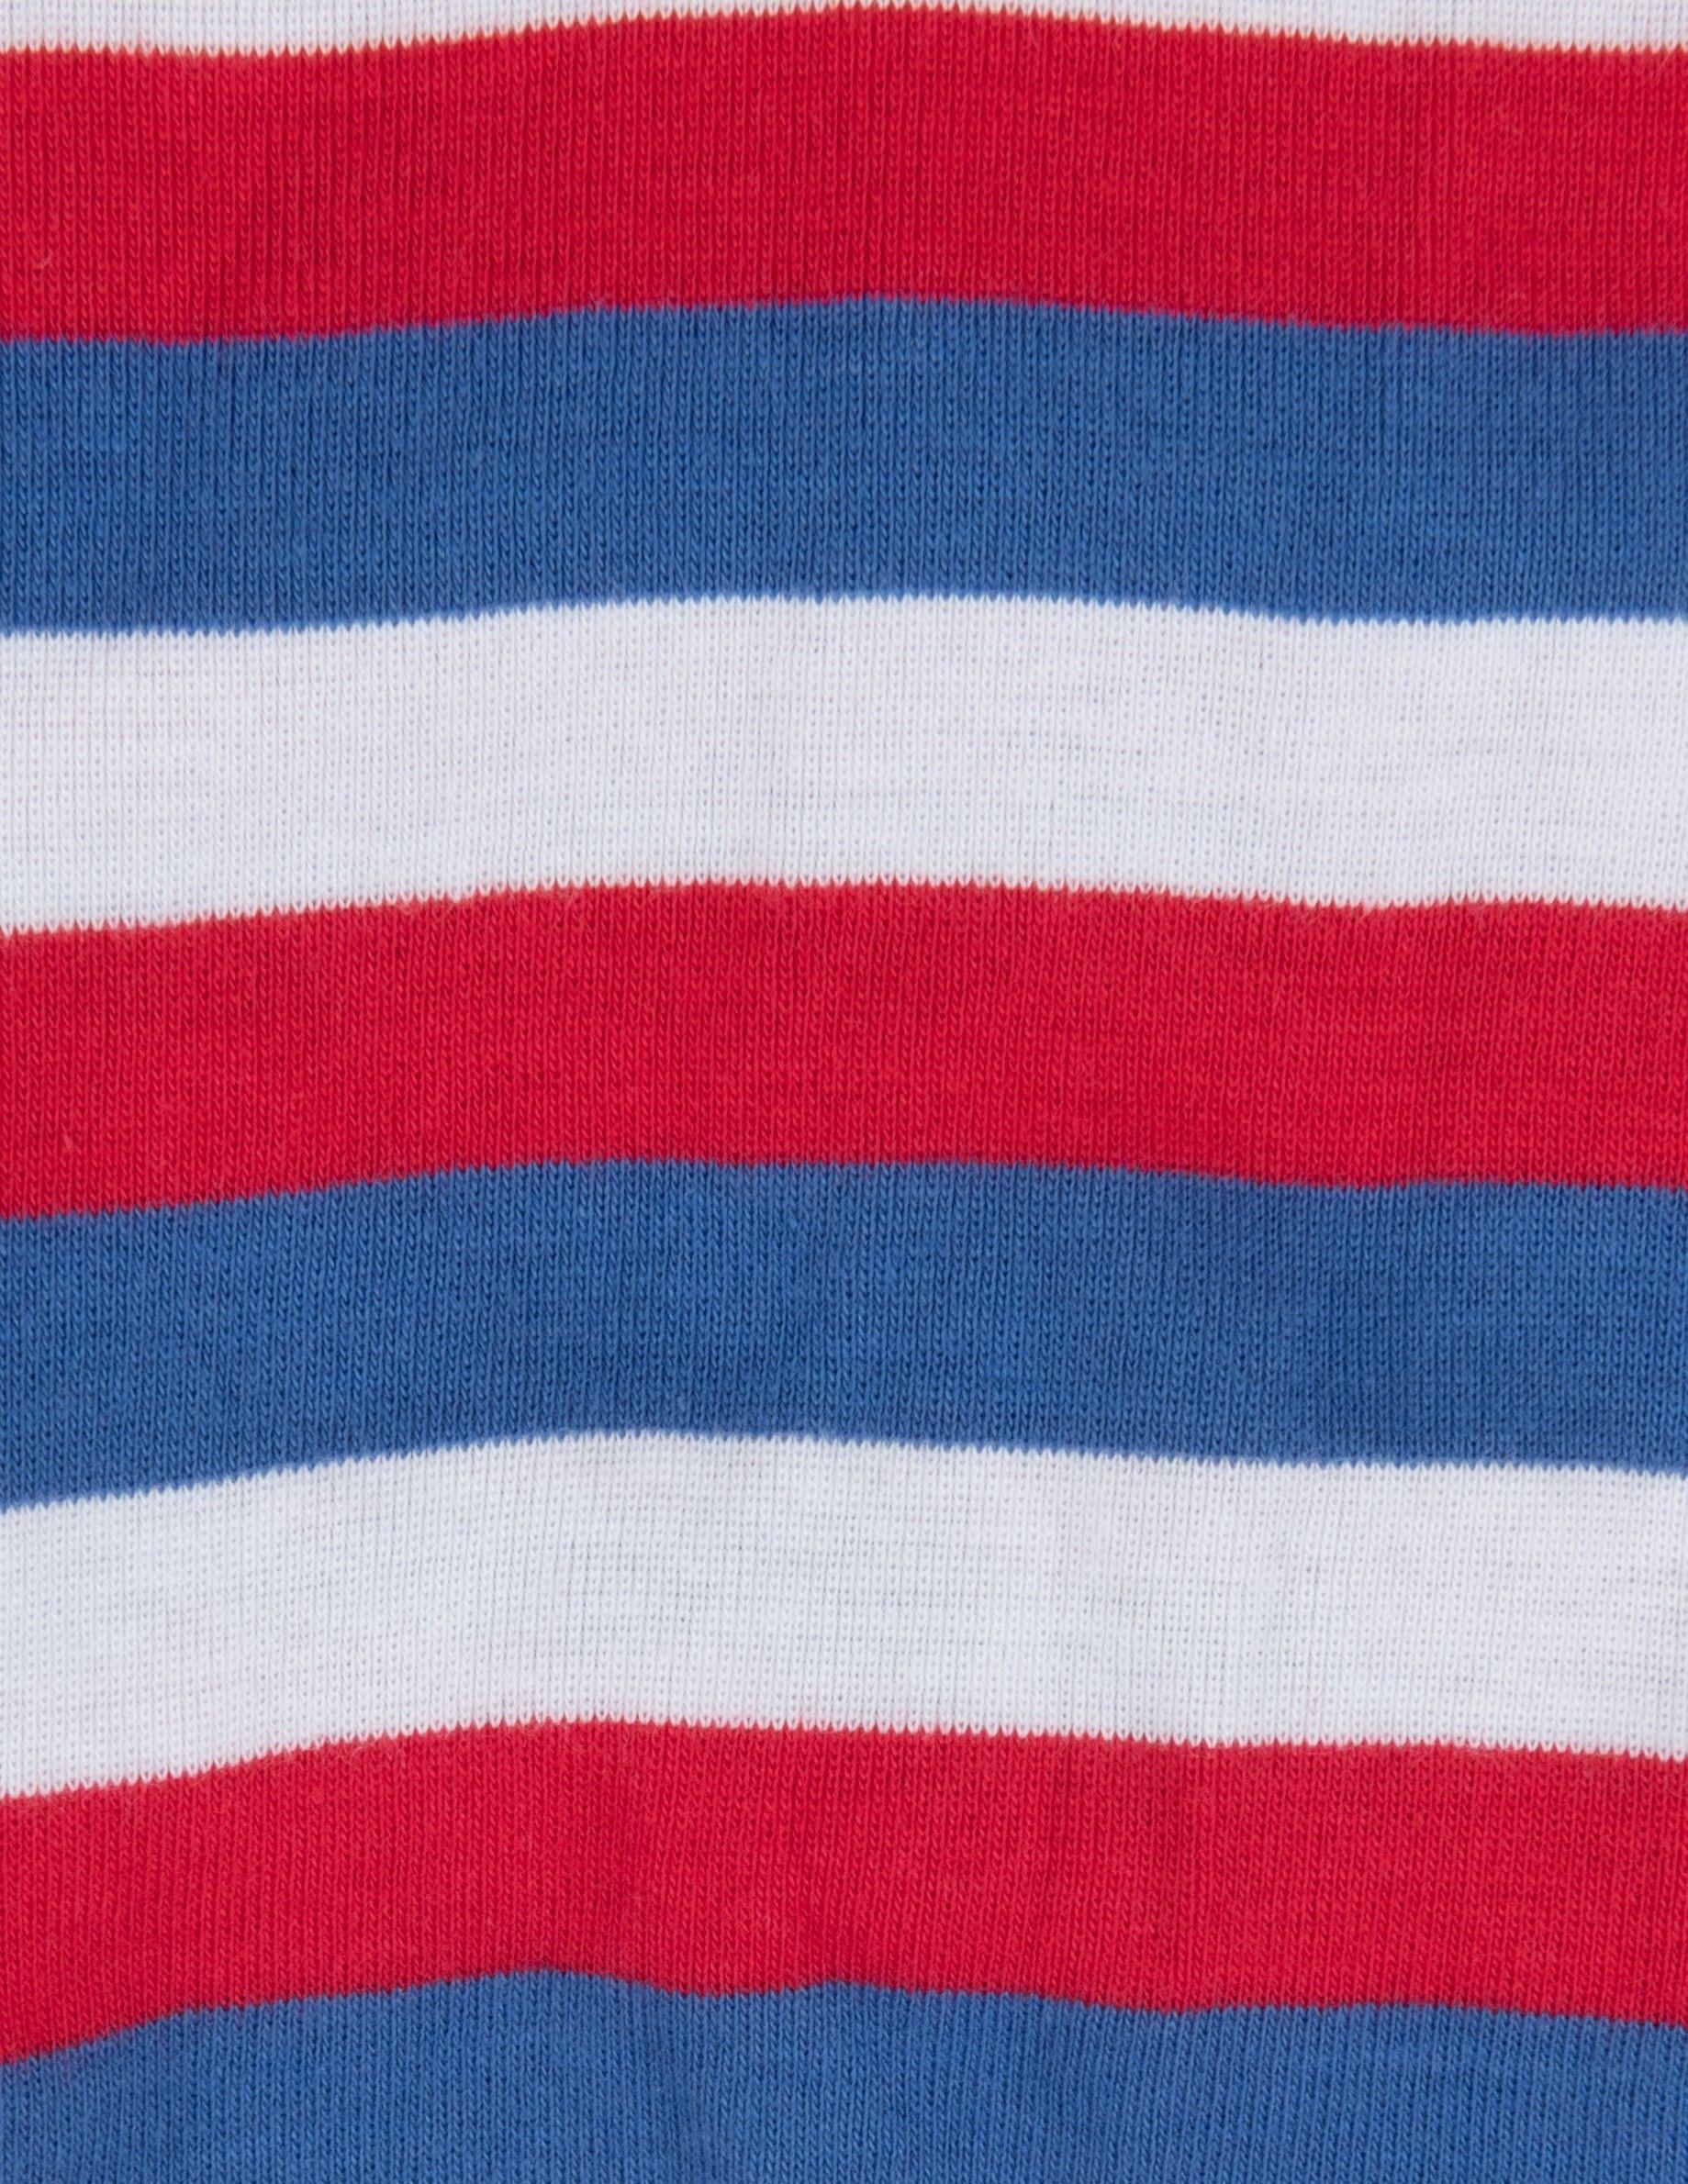 Red White and Blue Stripes Logo - Red, White and Blue Stripes Dog Pajama